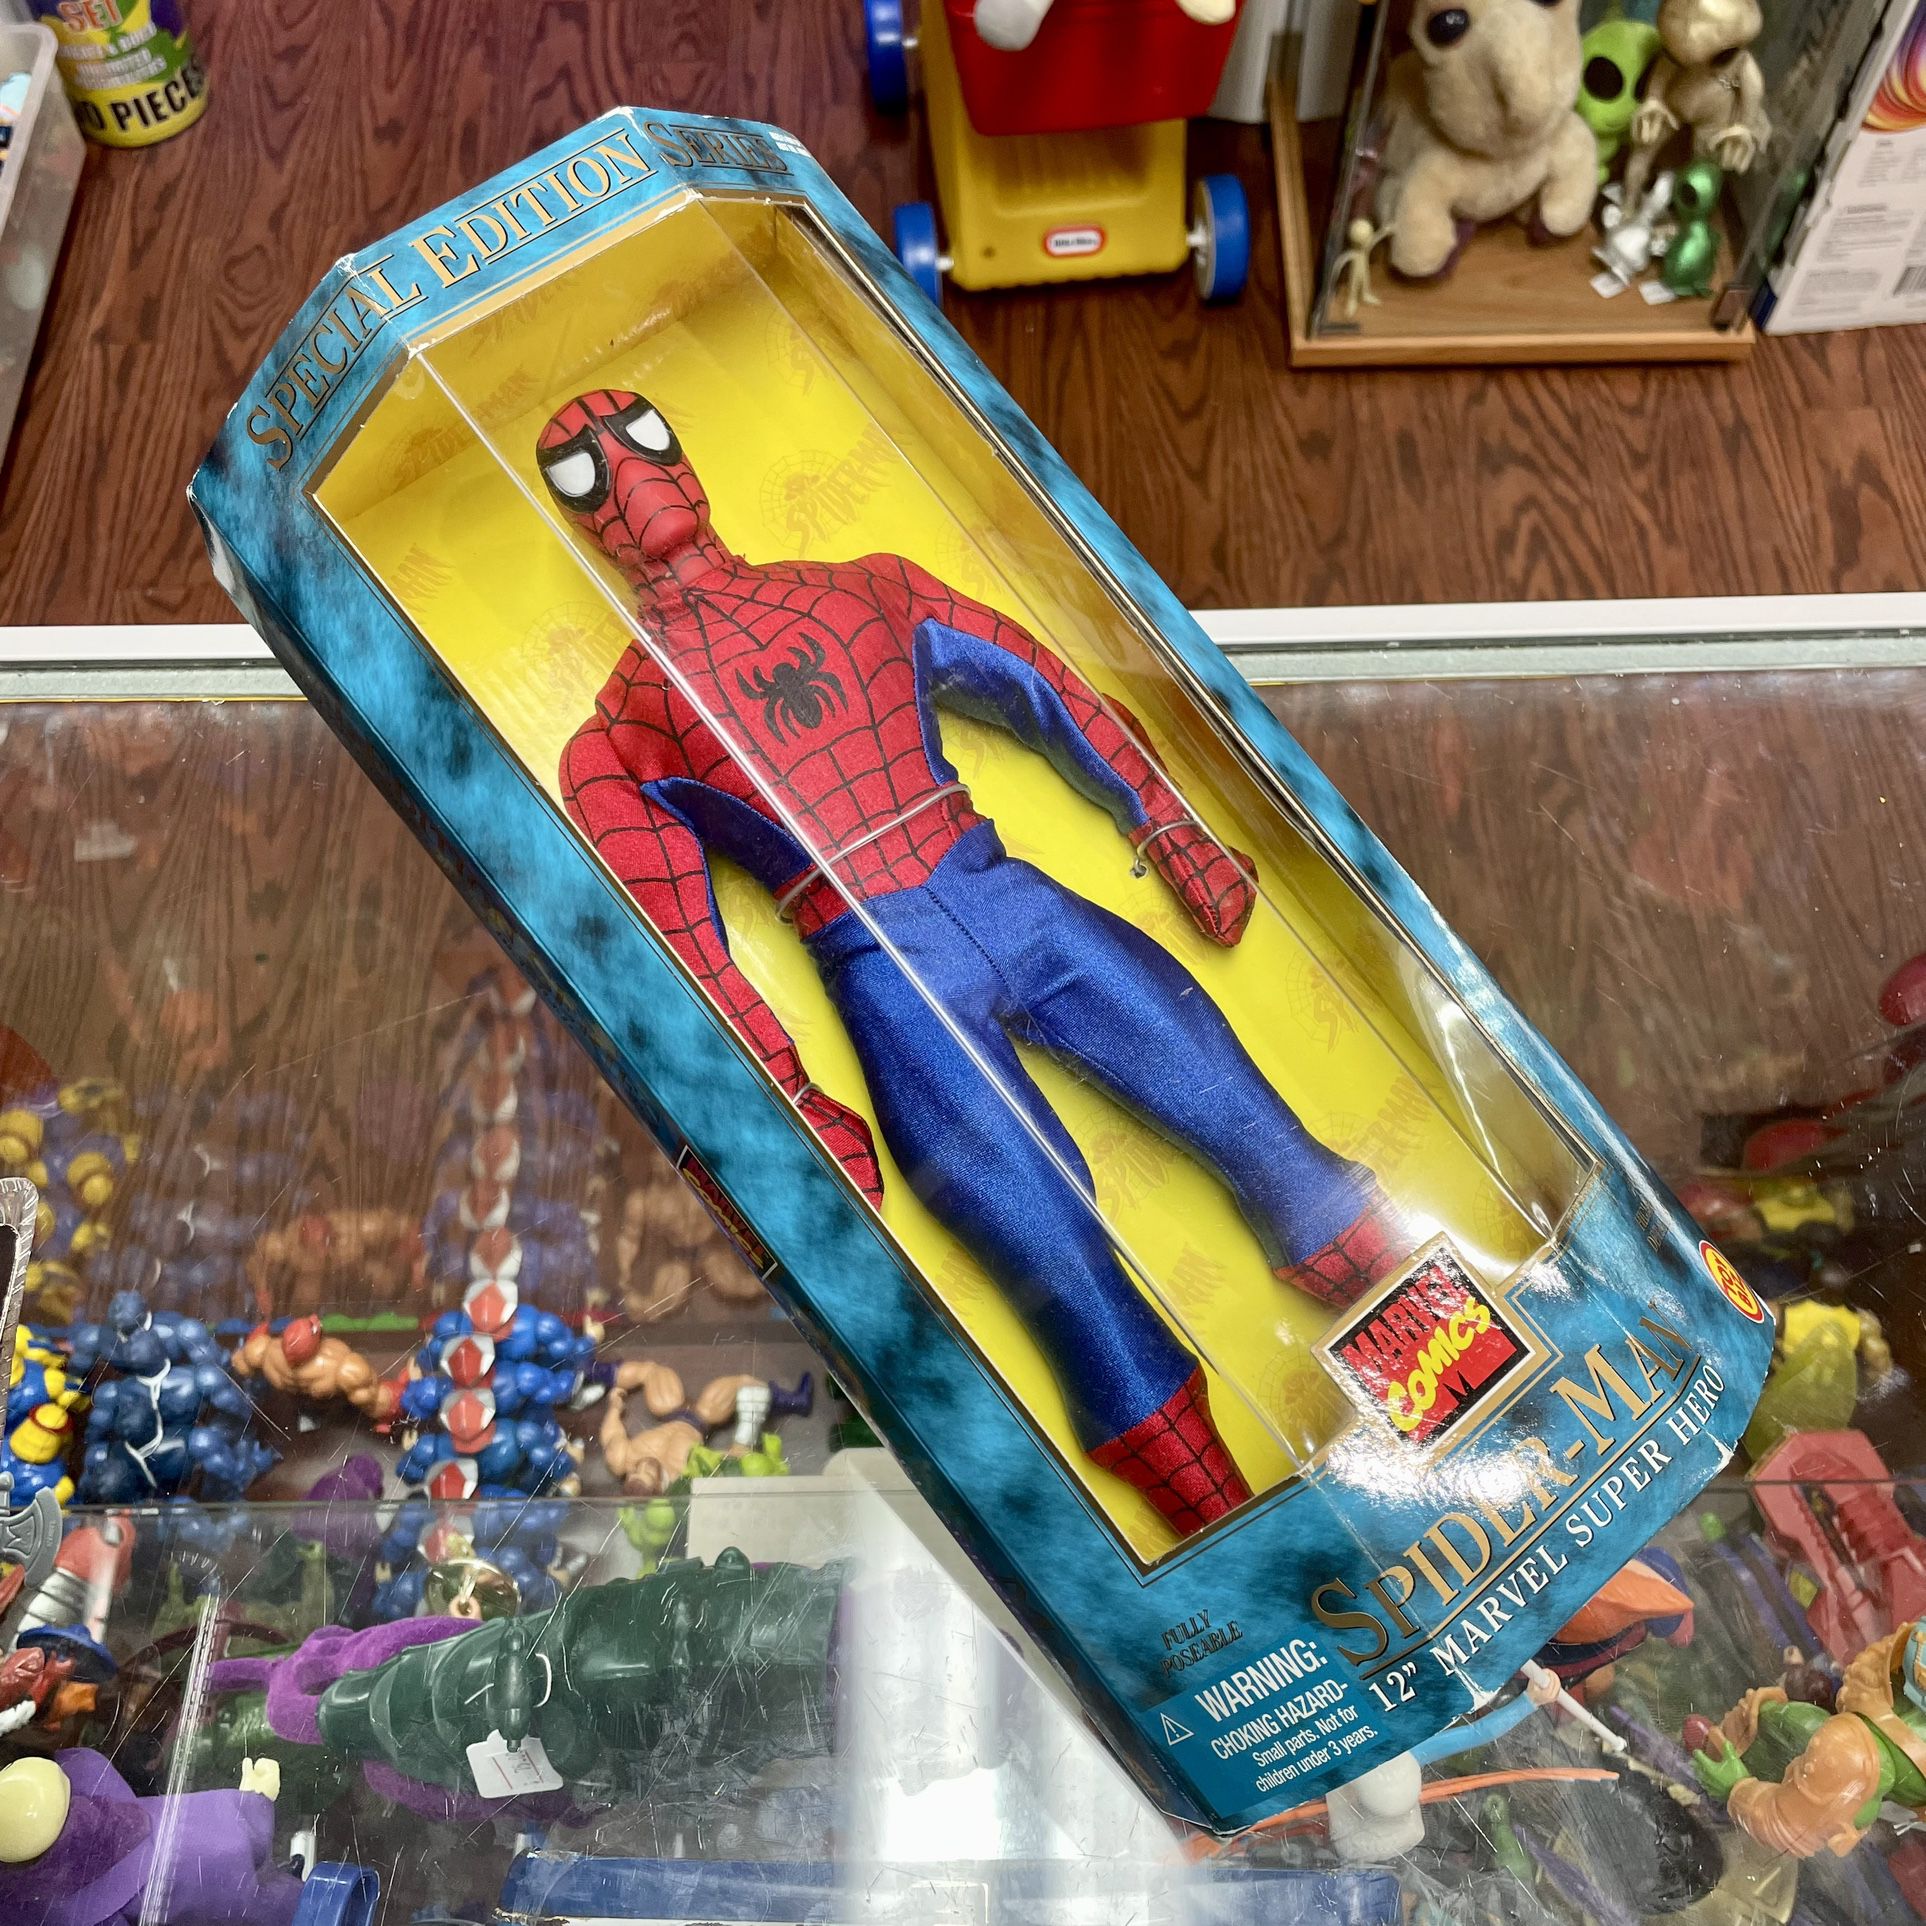 Vintage 1997 Toy Biz Special Edition Series Spider-Man 12” Marvel Super Hero Action Figure Toy NIB - Highly Detailed, Cloth Clothes